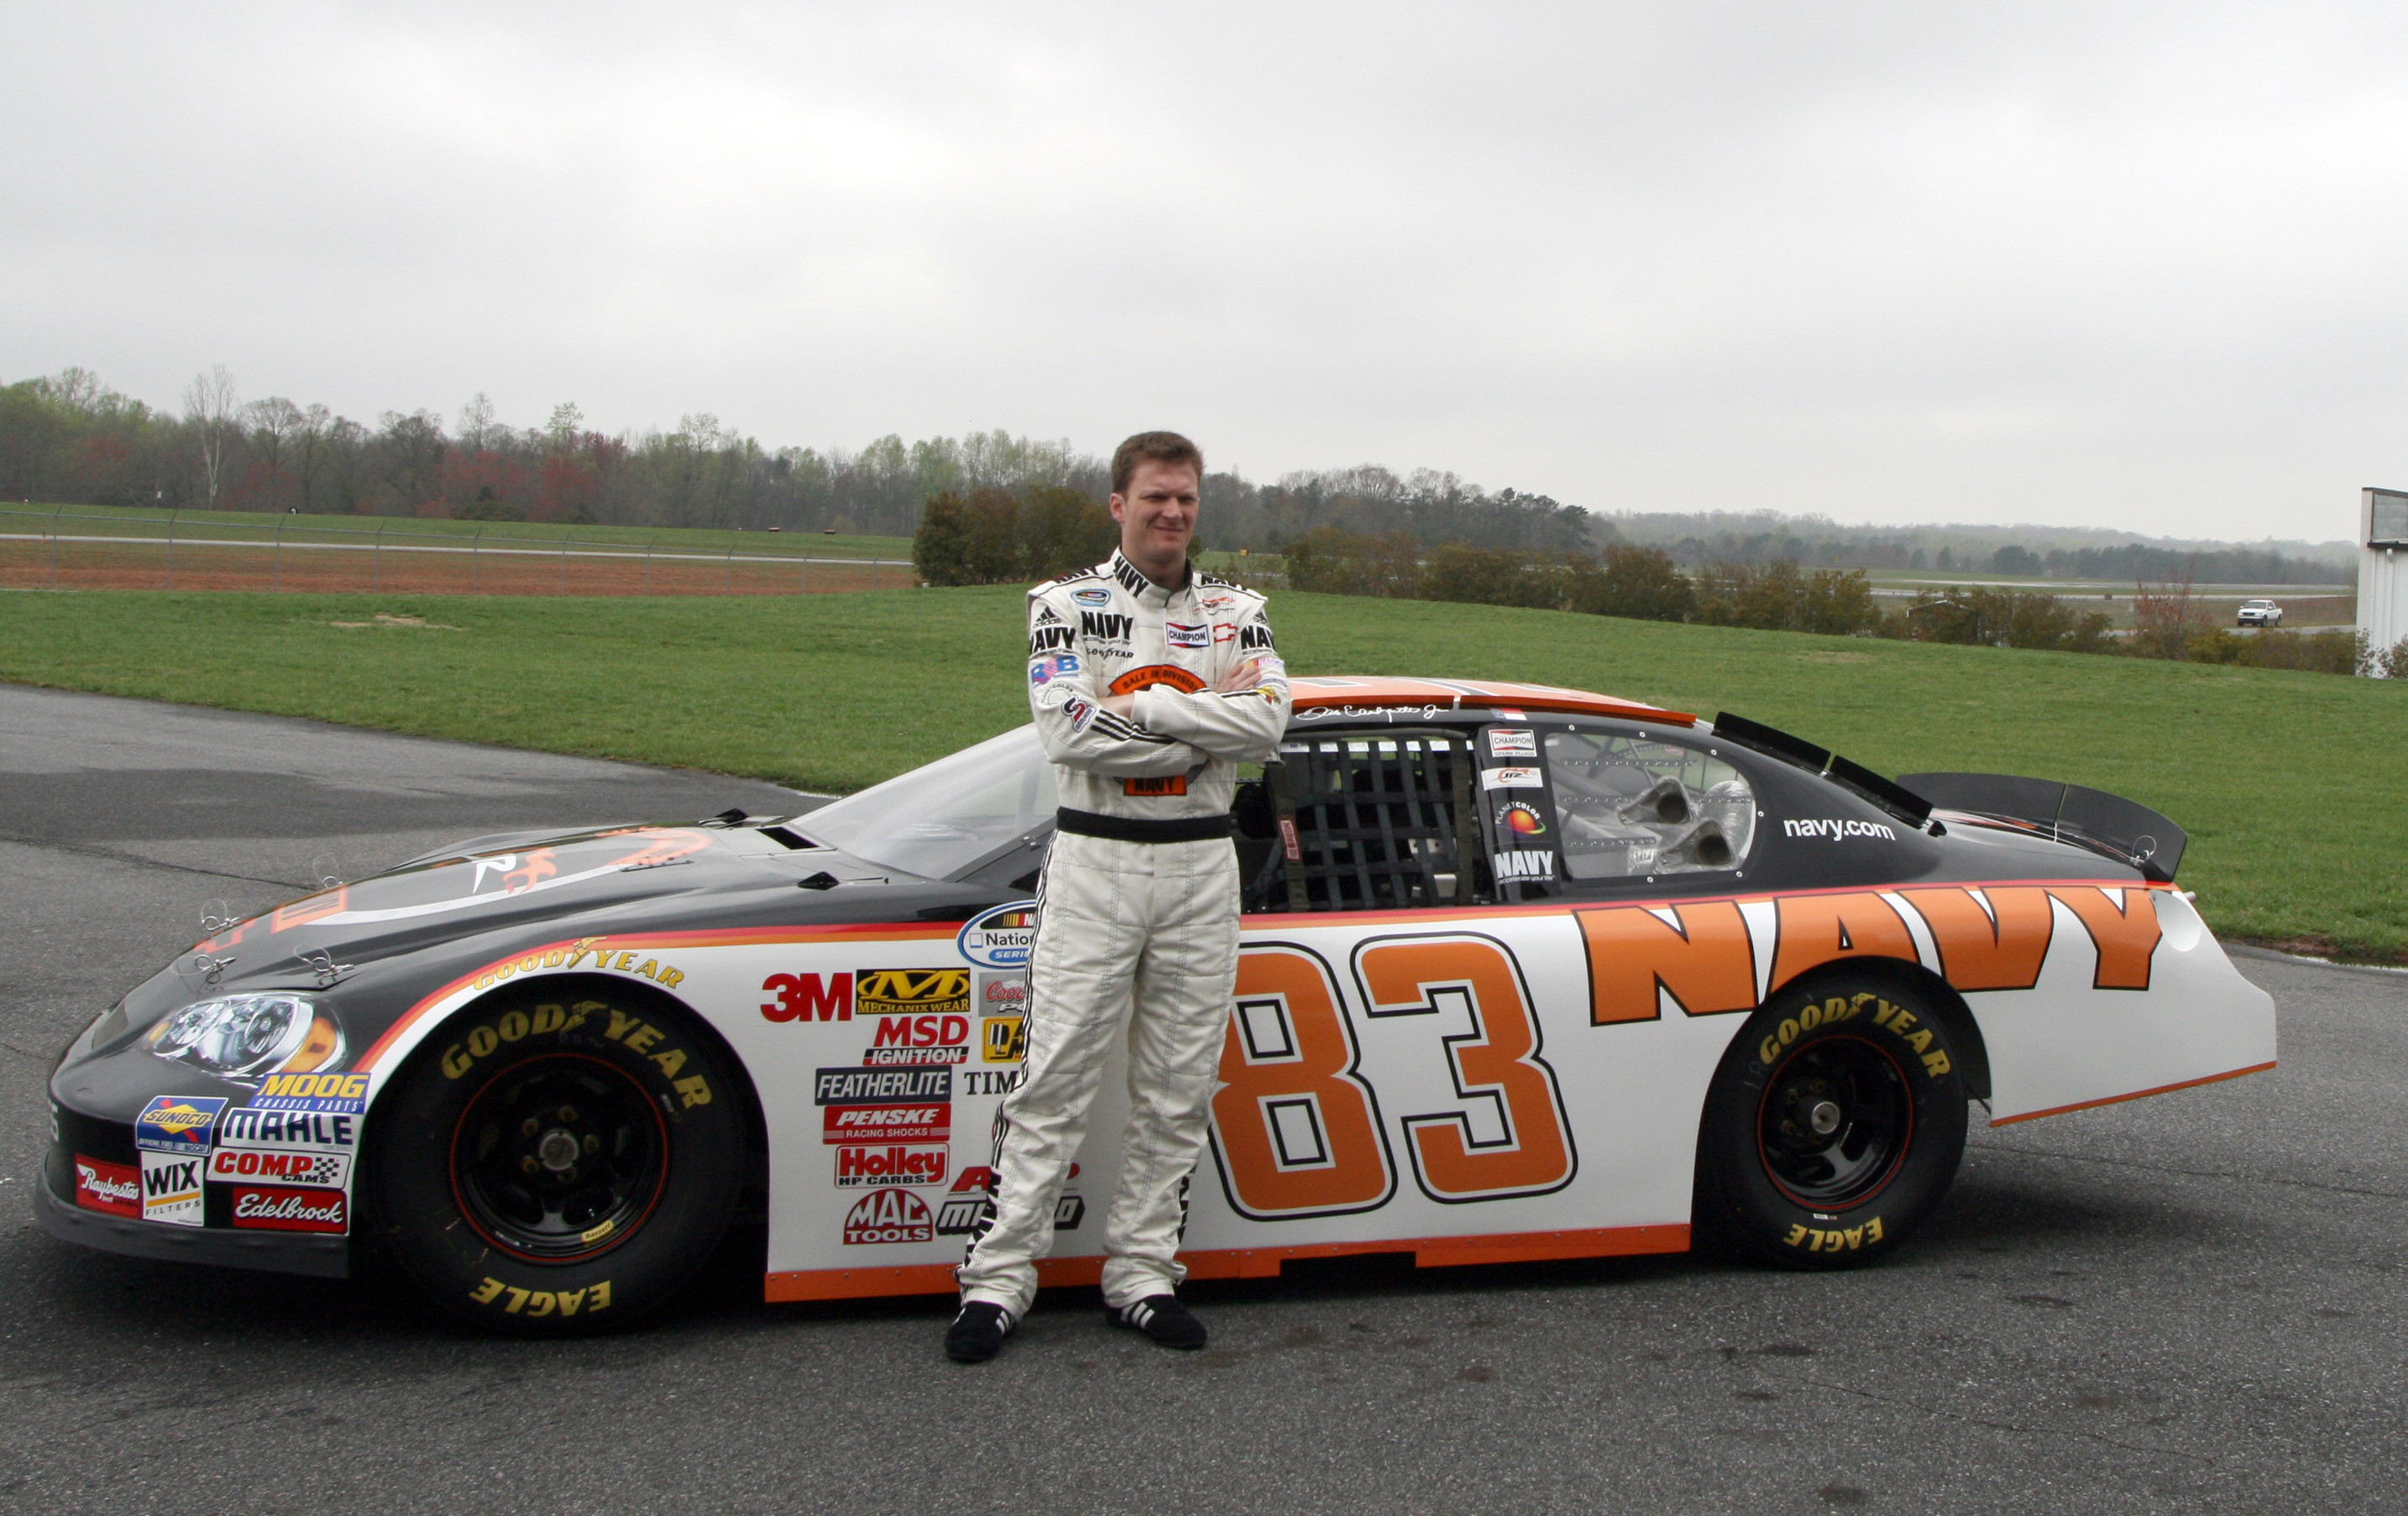 2868x1806 File:Dale Earnhardt Jr with Nationwide Series No 83 car.jpg